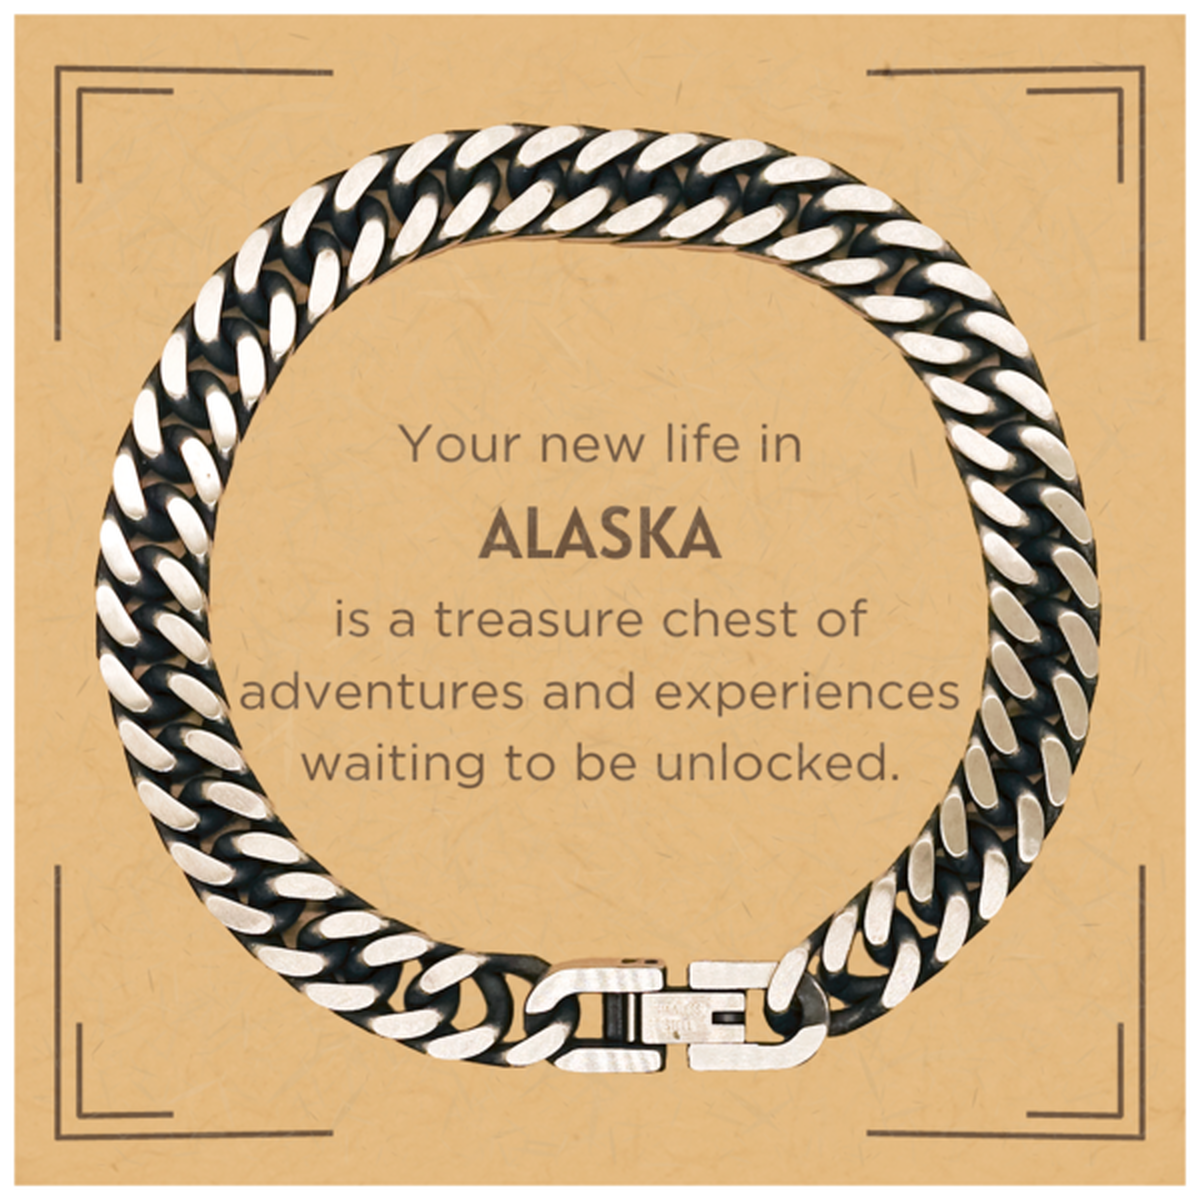 Moving to Alaska Gifts, Your new life in Alaska, Long Distance Alaska Christmas Cuban Link Chain Bracelet For Men, Women, Friends, Coworkers